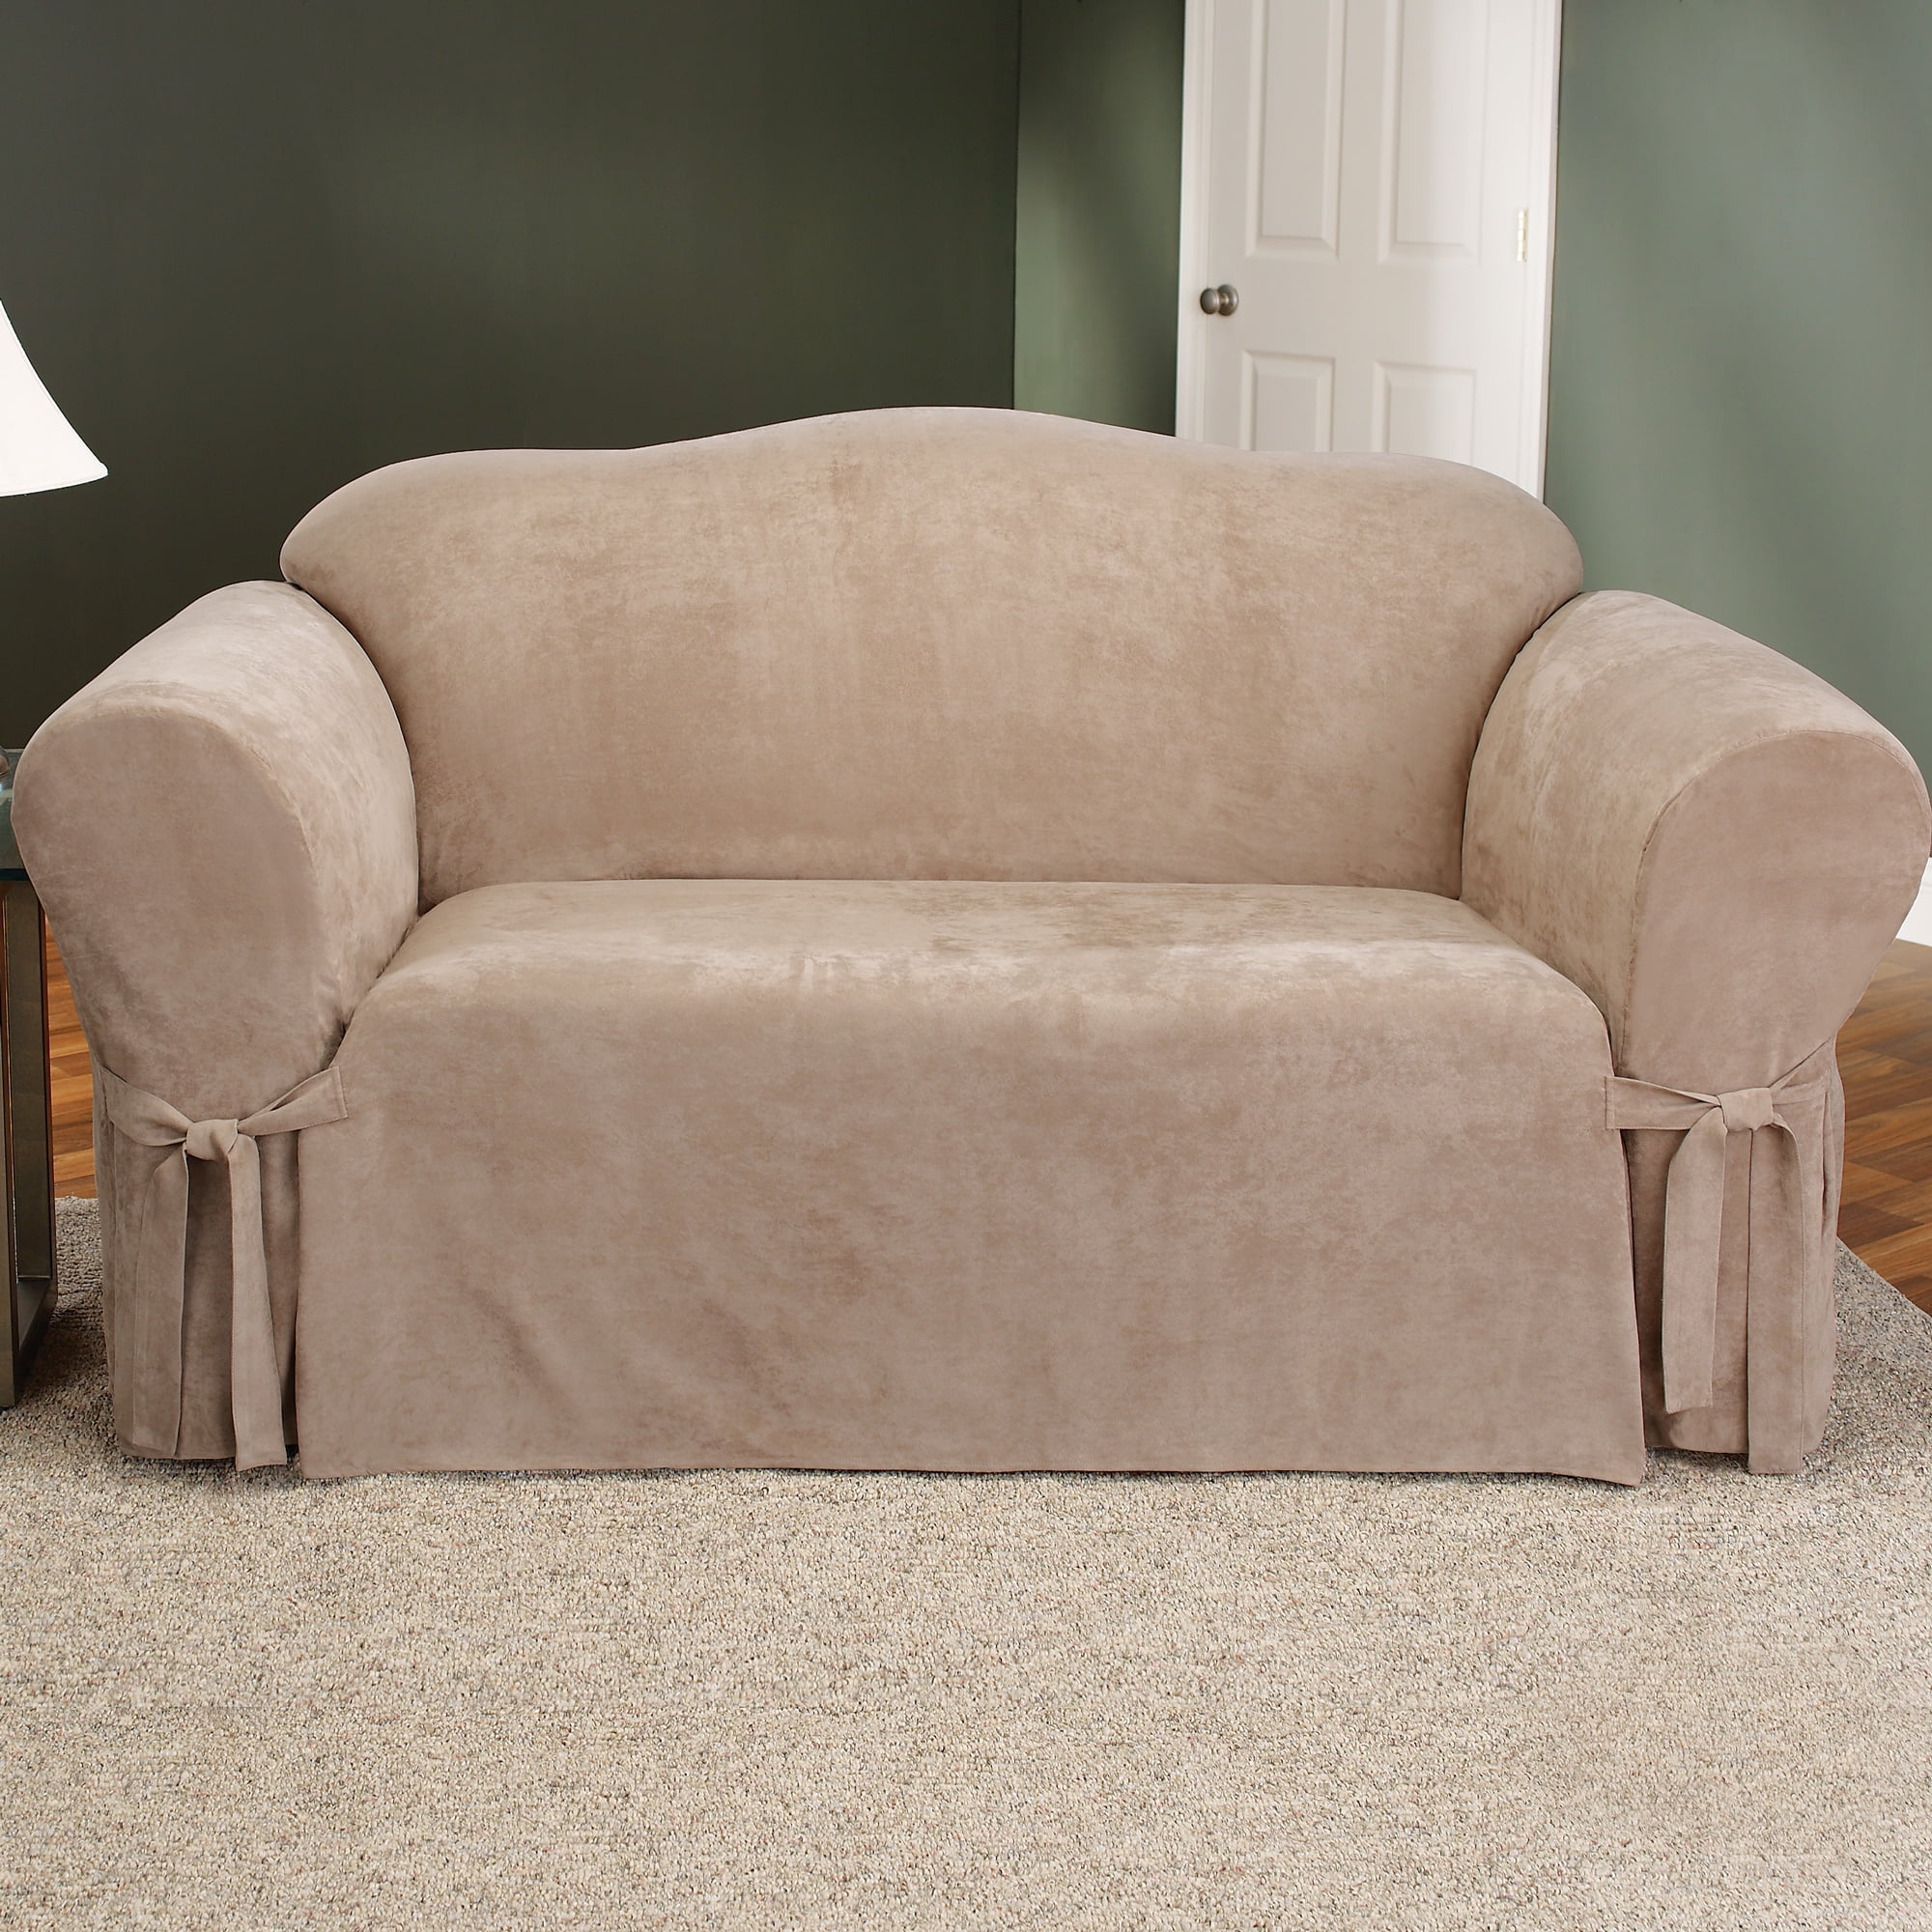 Sure Fit Soft Suede Loveseat Slipcover in Taupe/Tan Box Style Seat Cushion 1PC 